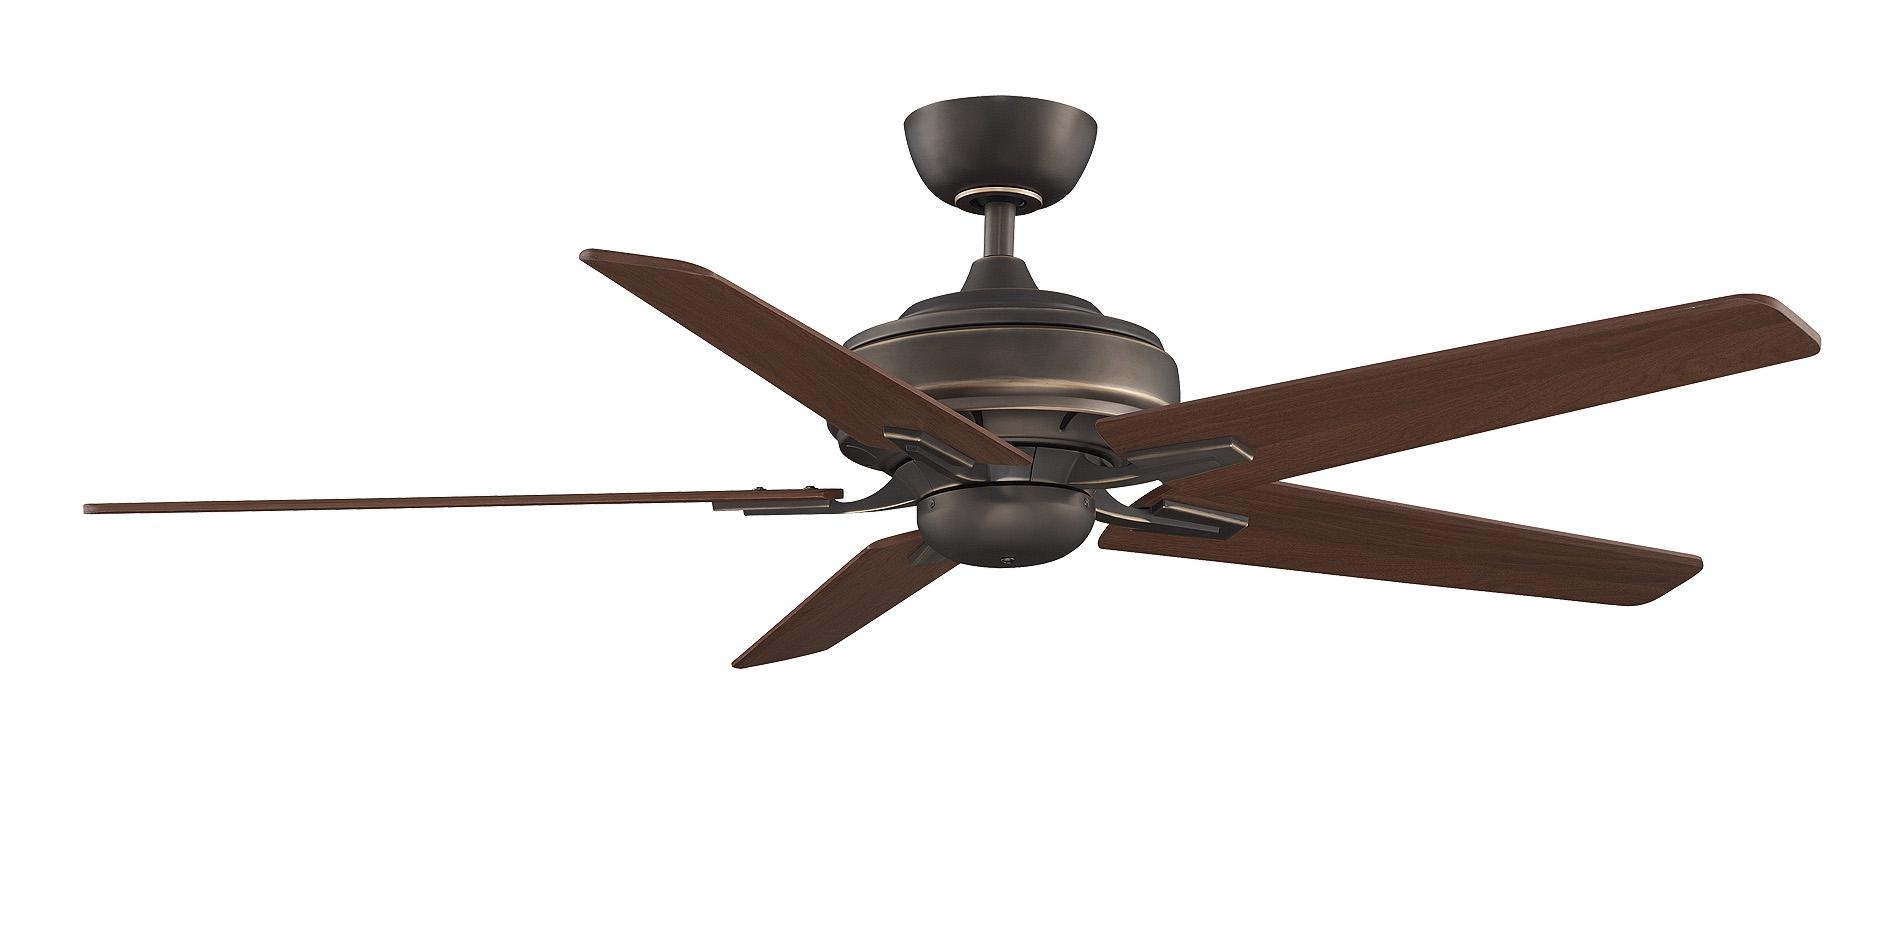 Permalink to Elegant Ceiling Fans Without Lights